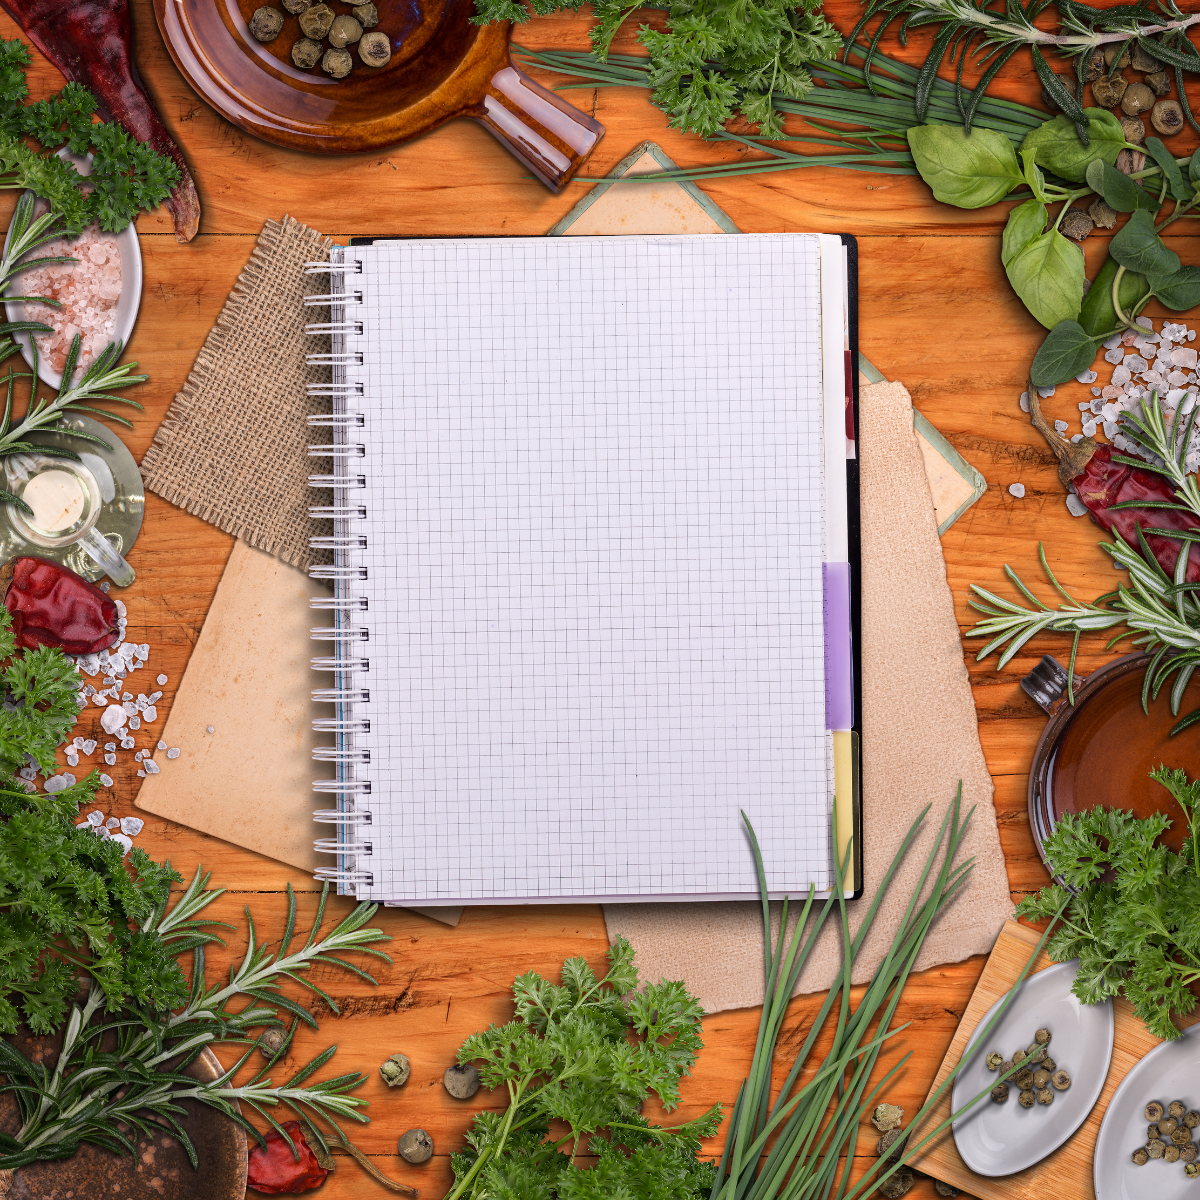 9. Create Lasting Memories with a Personalized Recipe Book